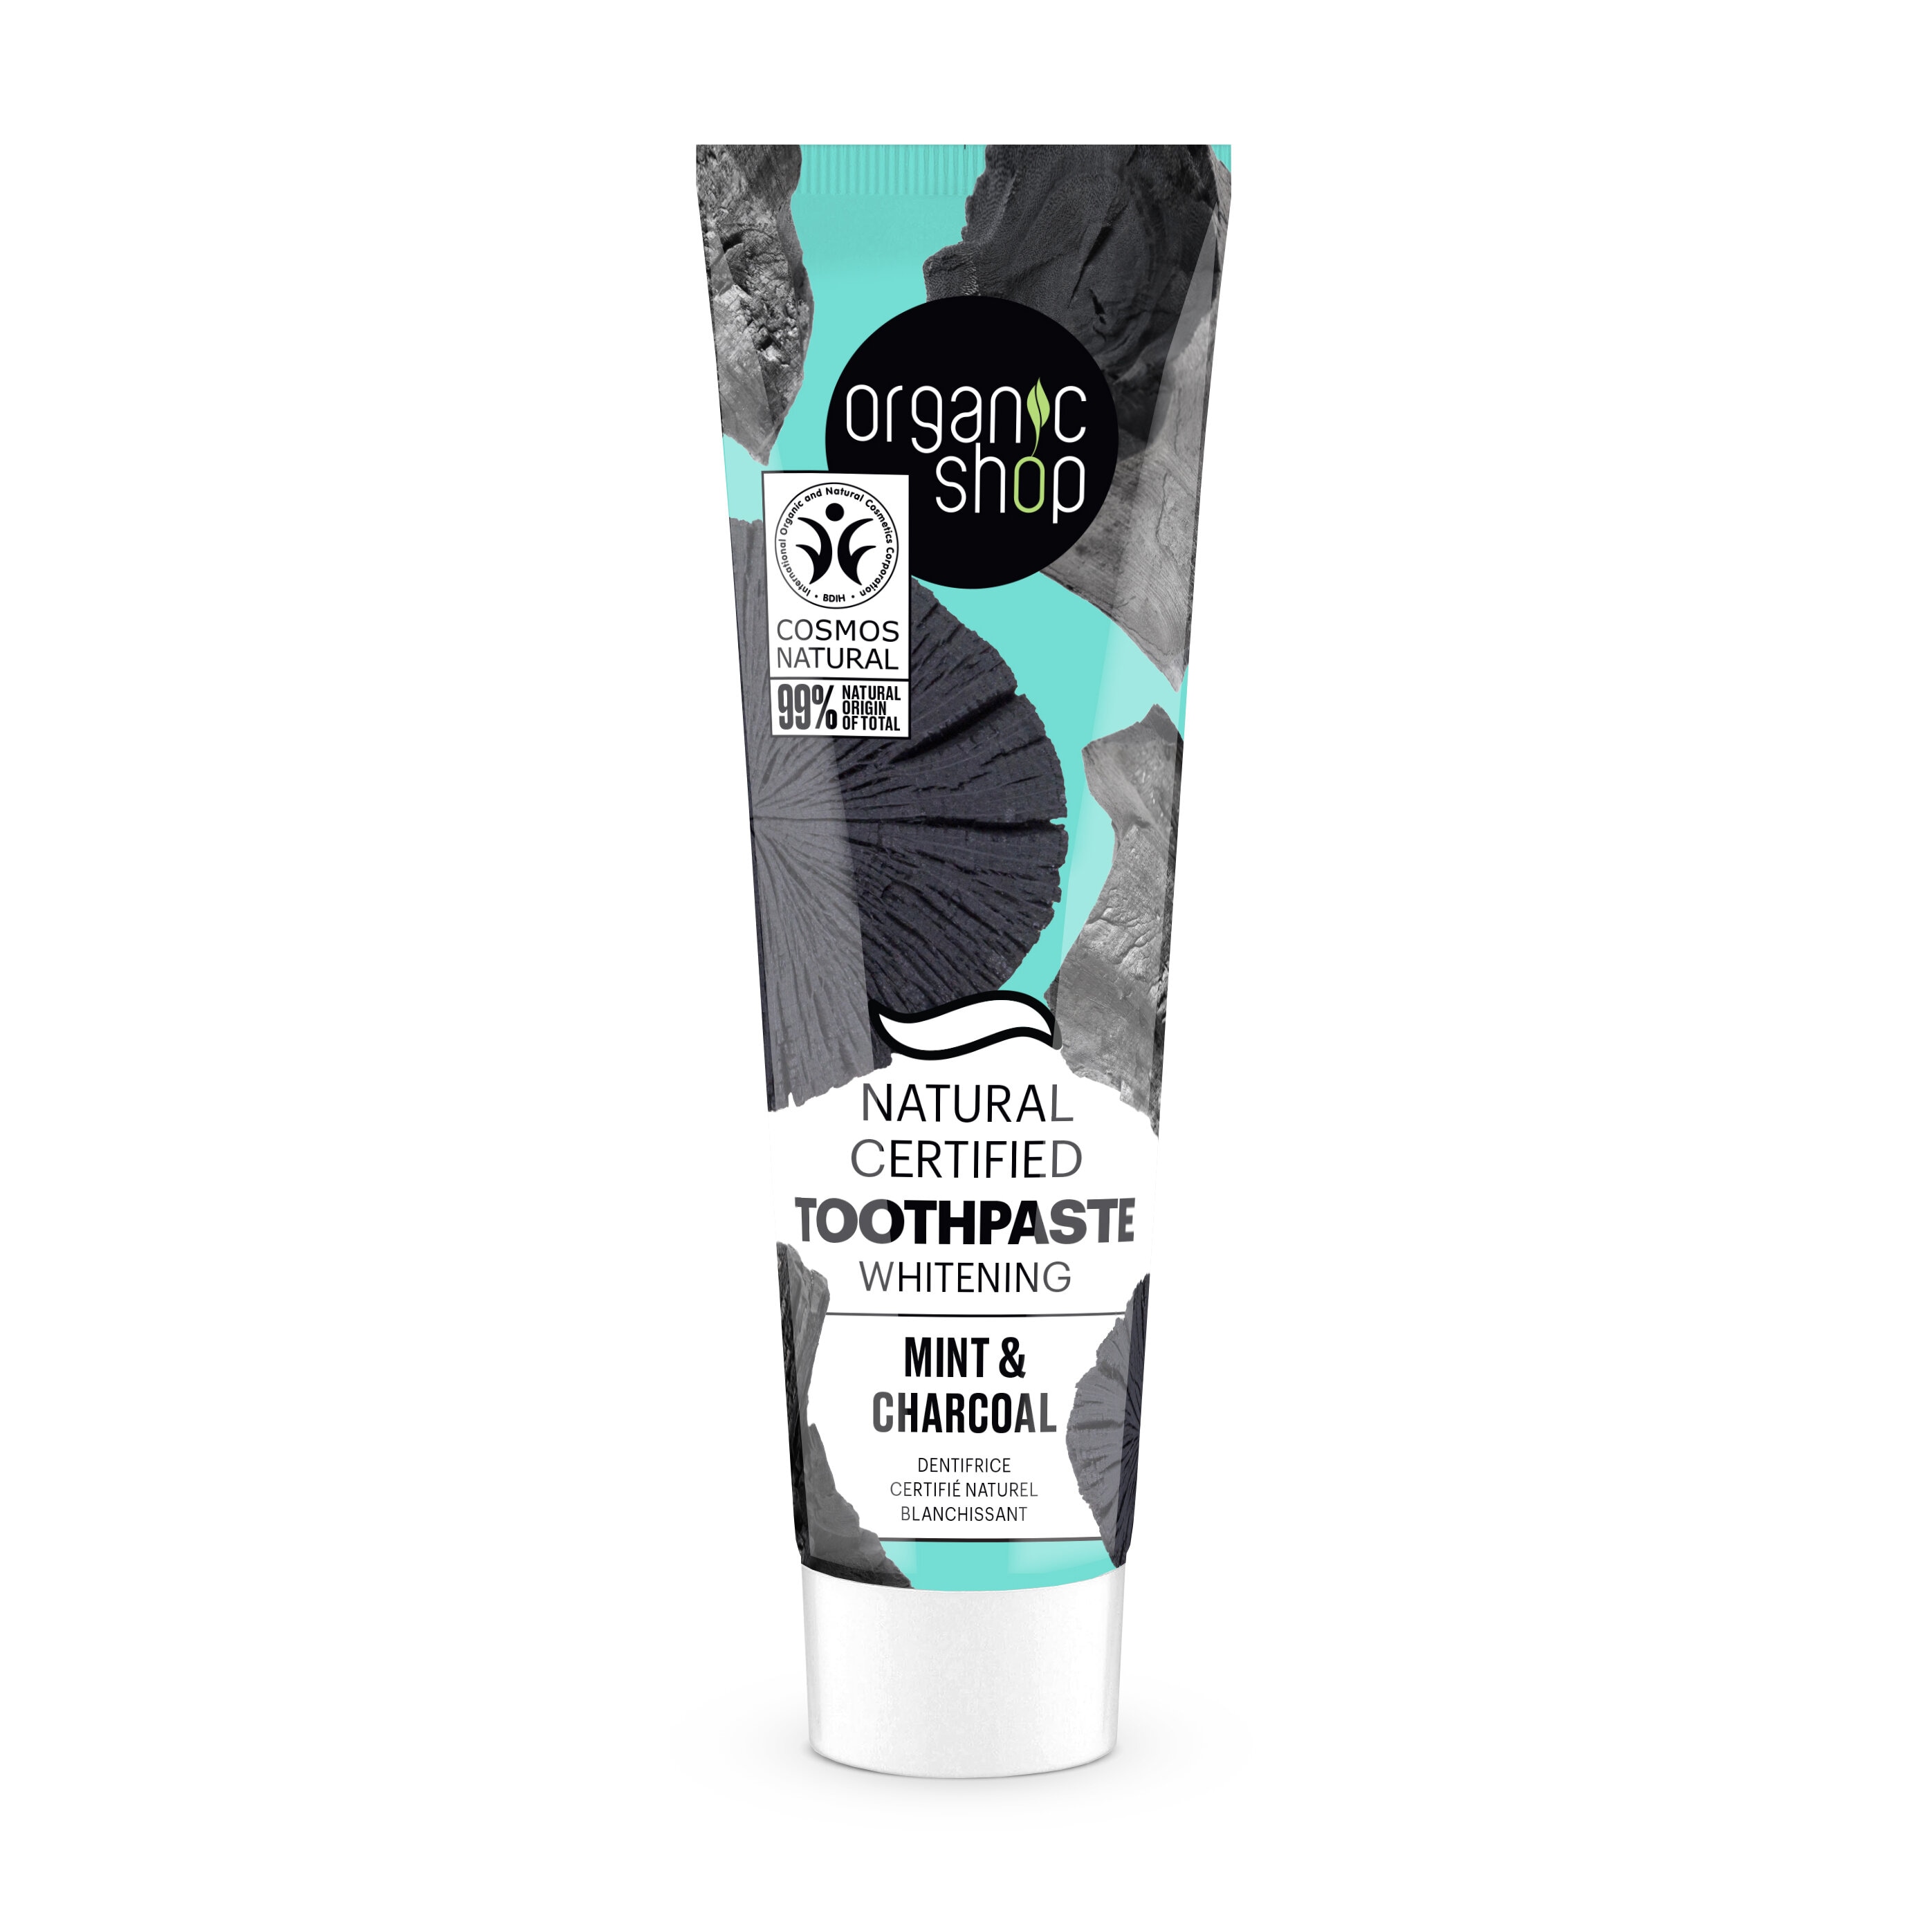 Charcoal & Mint Toothpaste Whitening 100g